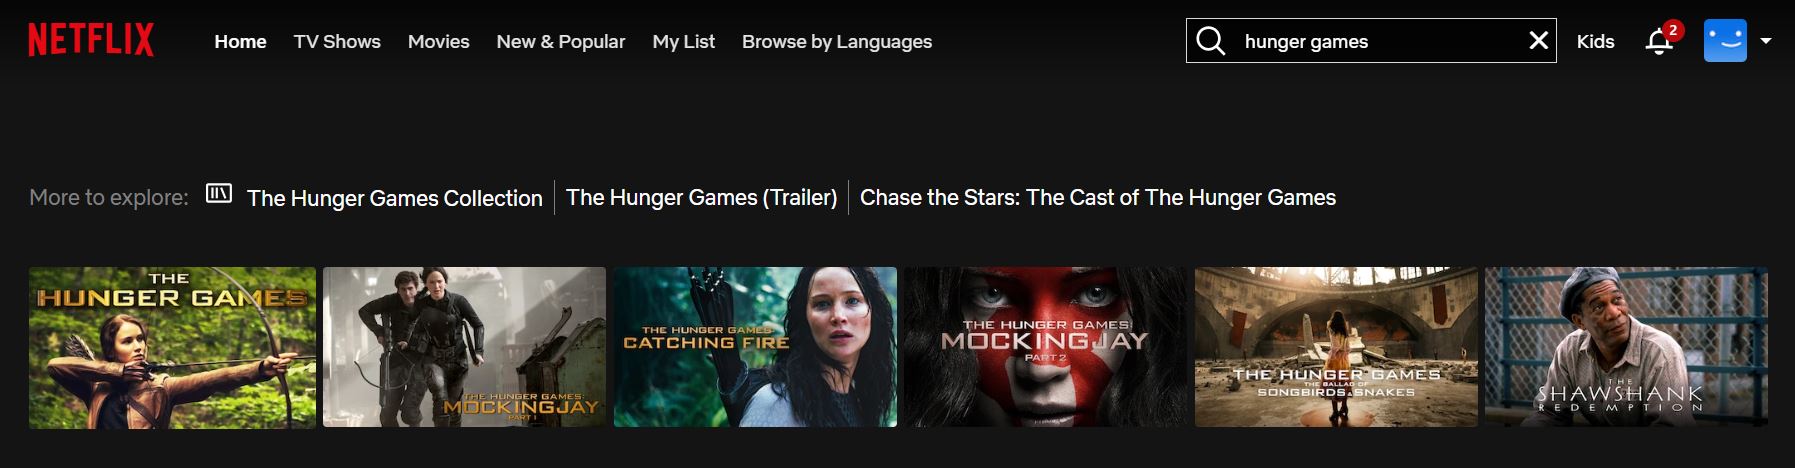 Hunger Games movies on Netflix